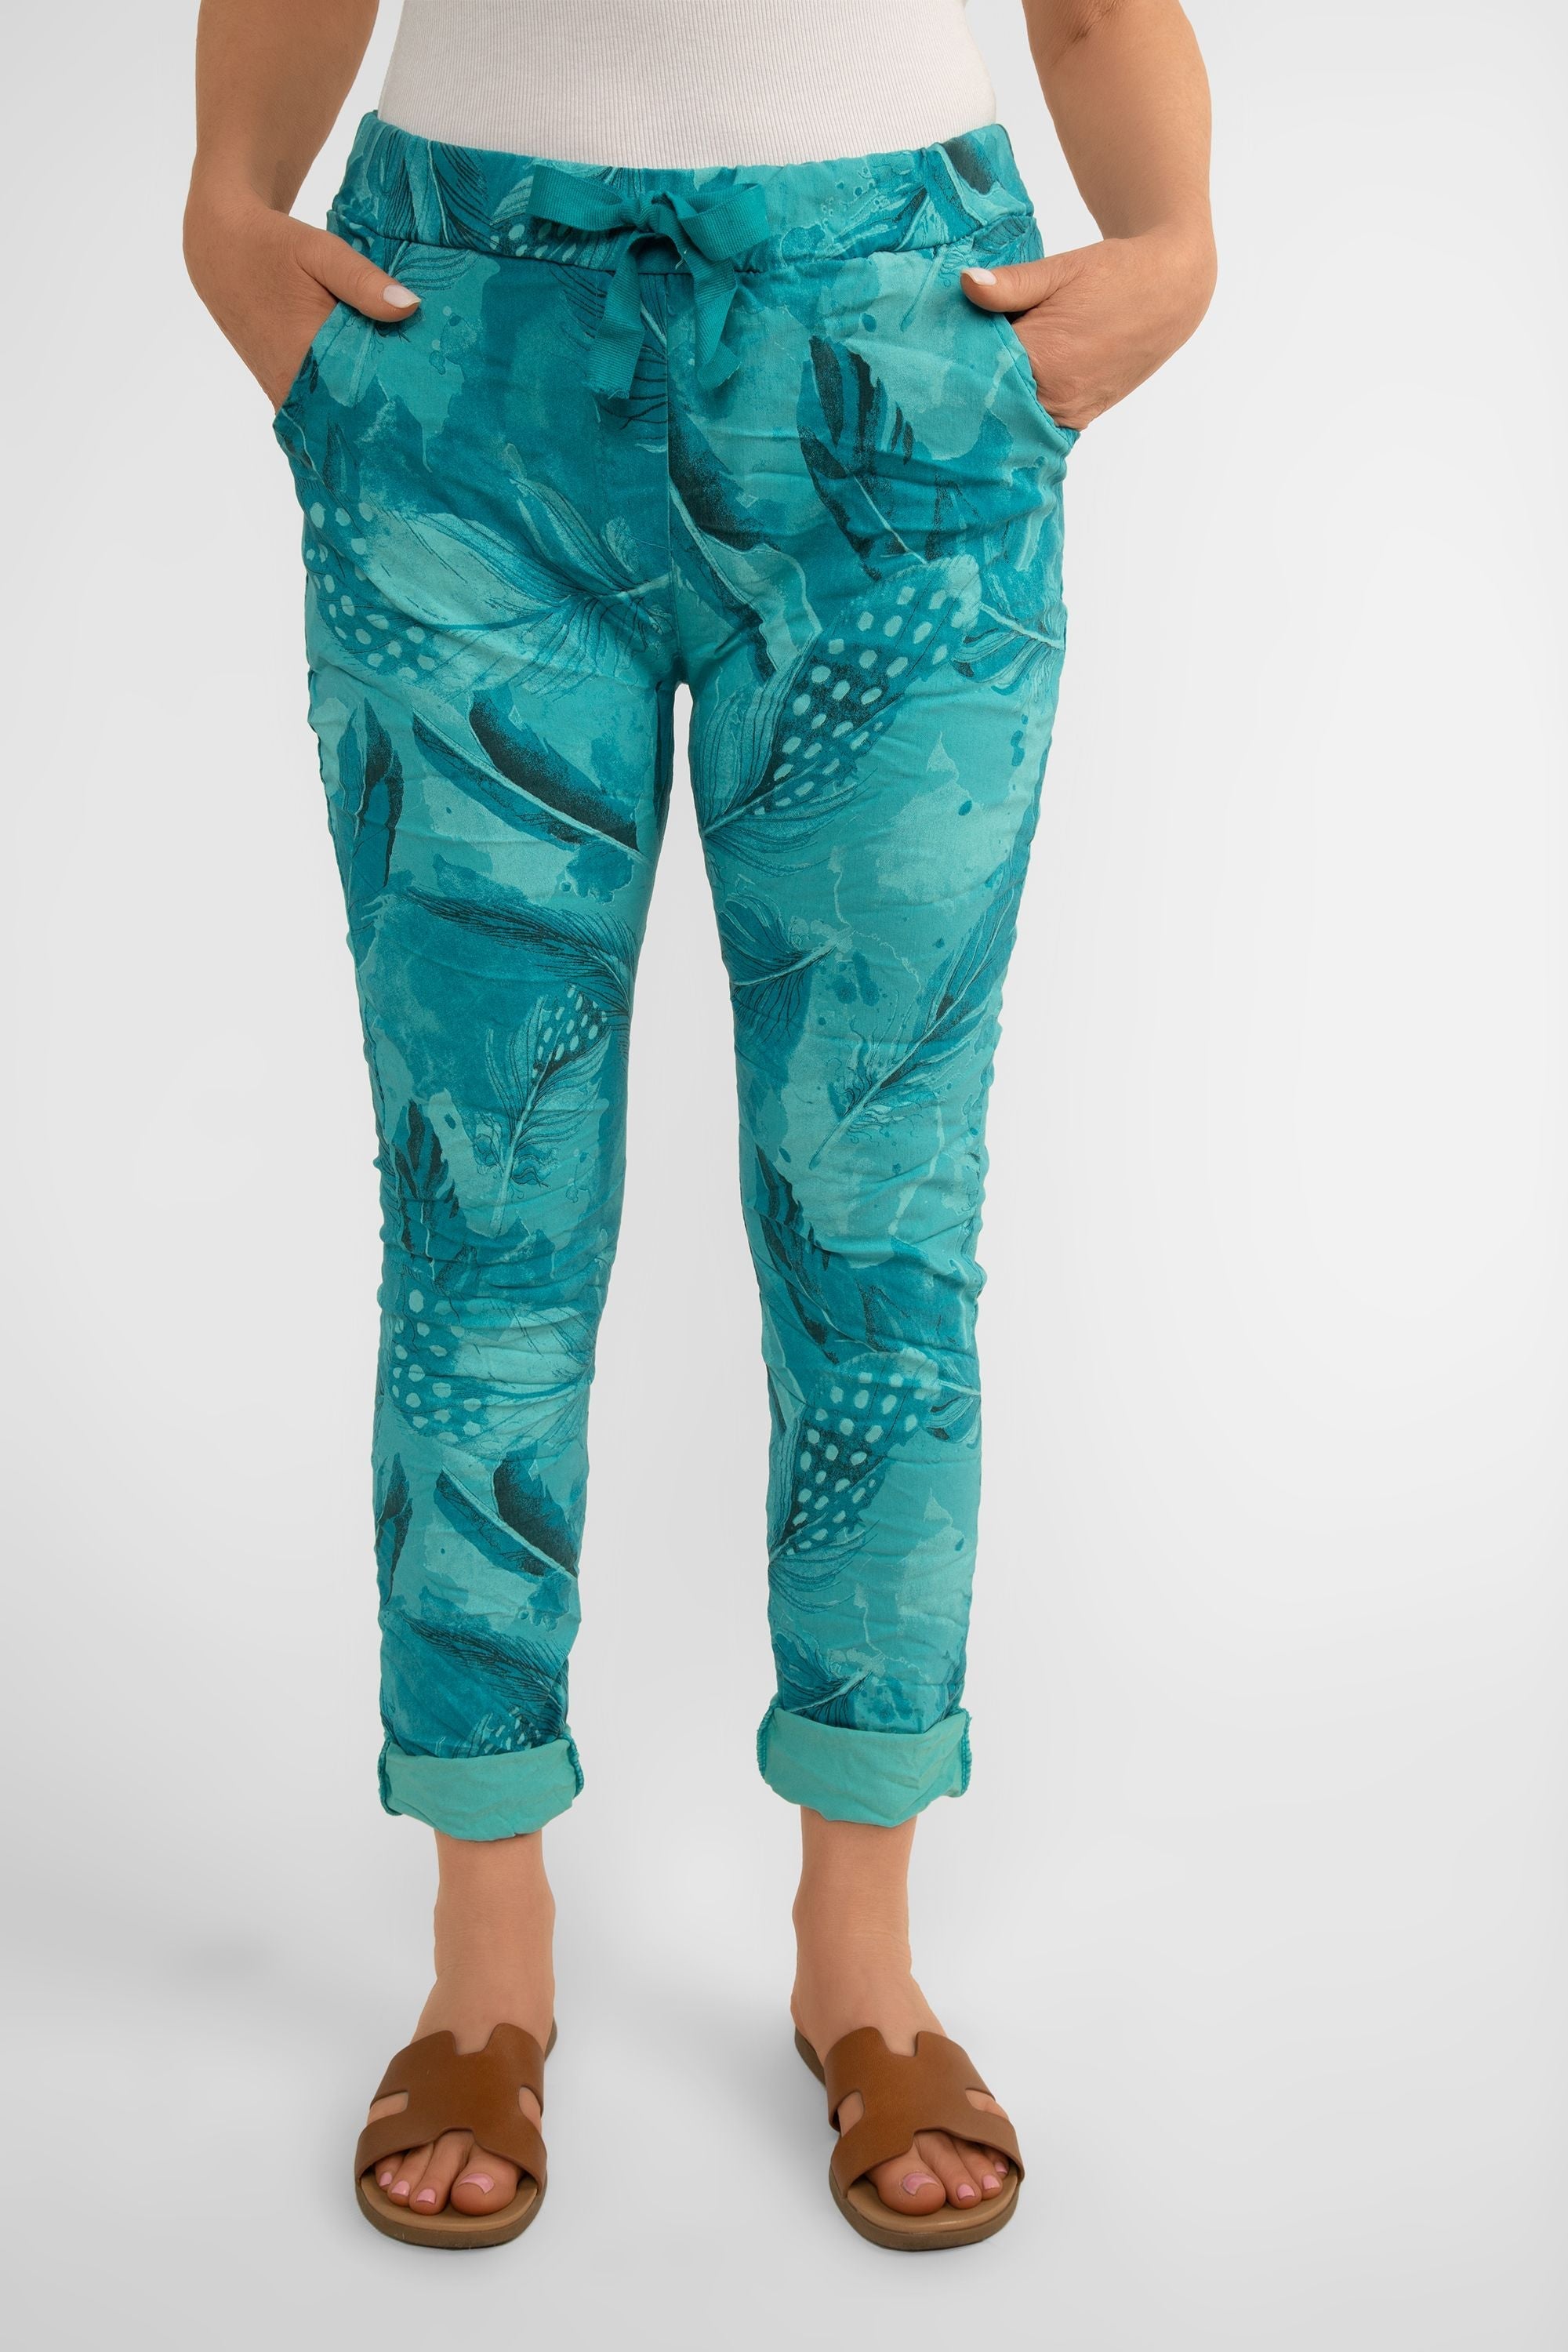 Bella Amore (21144) Women's Slim Fit Cropped Crinkle Pants with Side Pockets, Pull-on waist in Teal Feather Print